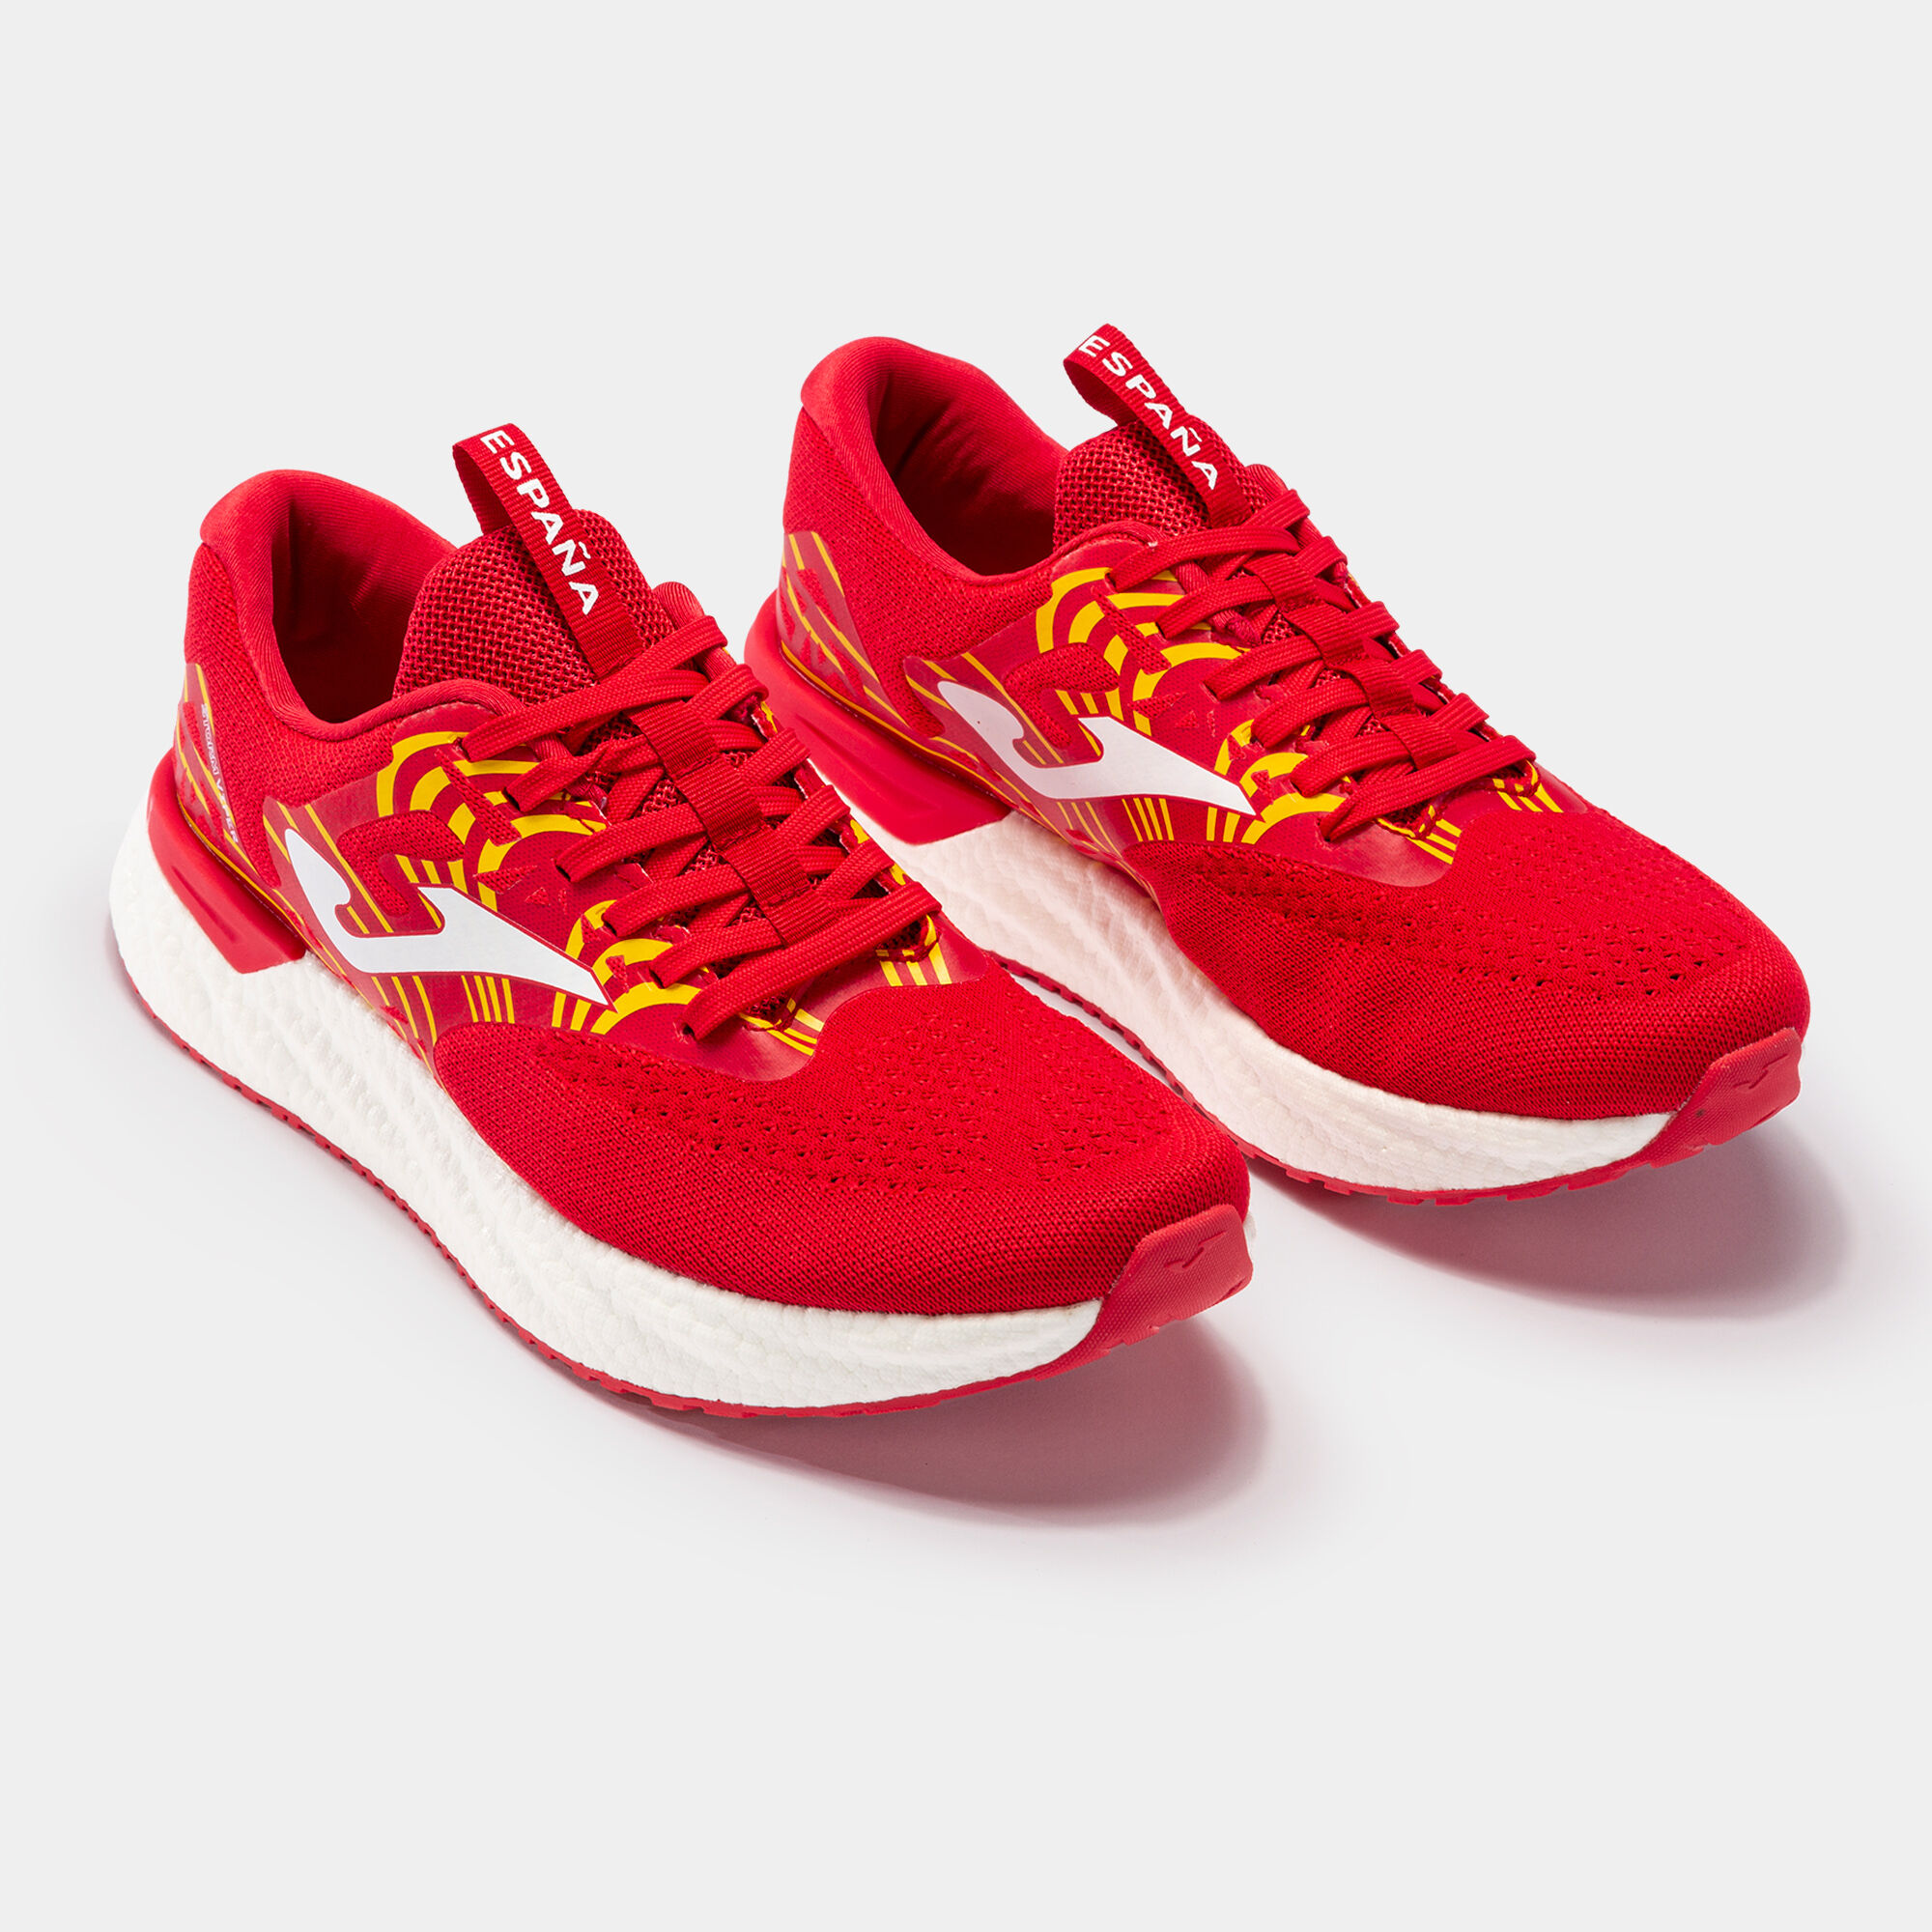 CHAUSSURES RUNNING VIPER 22 ESPAGNE HOMME ROUGE